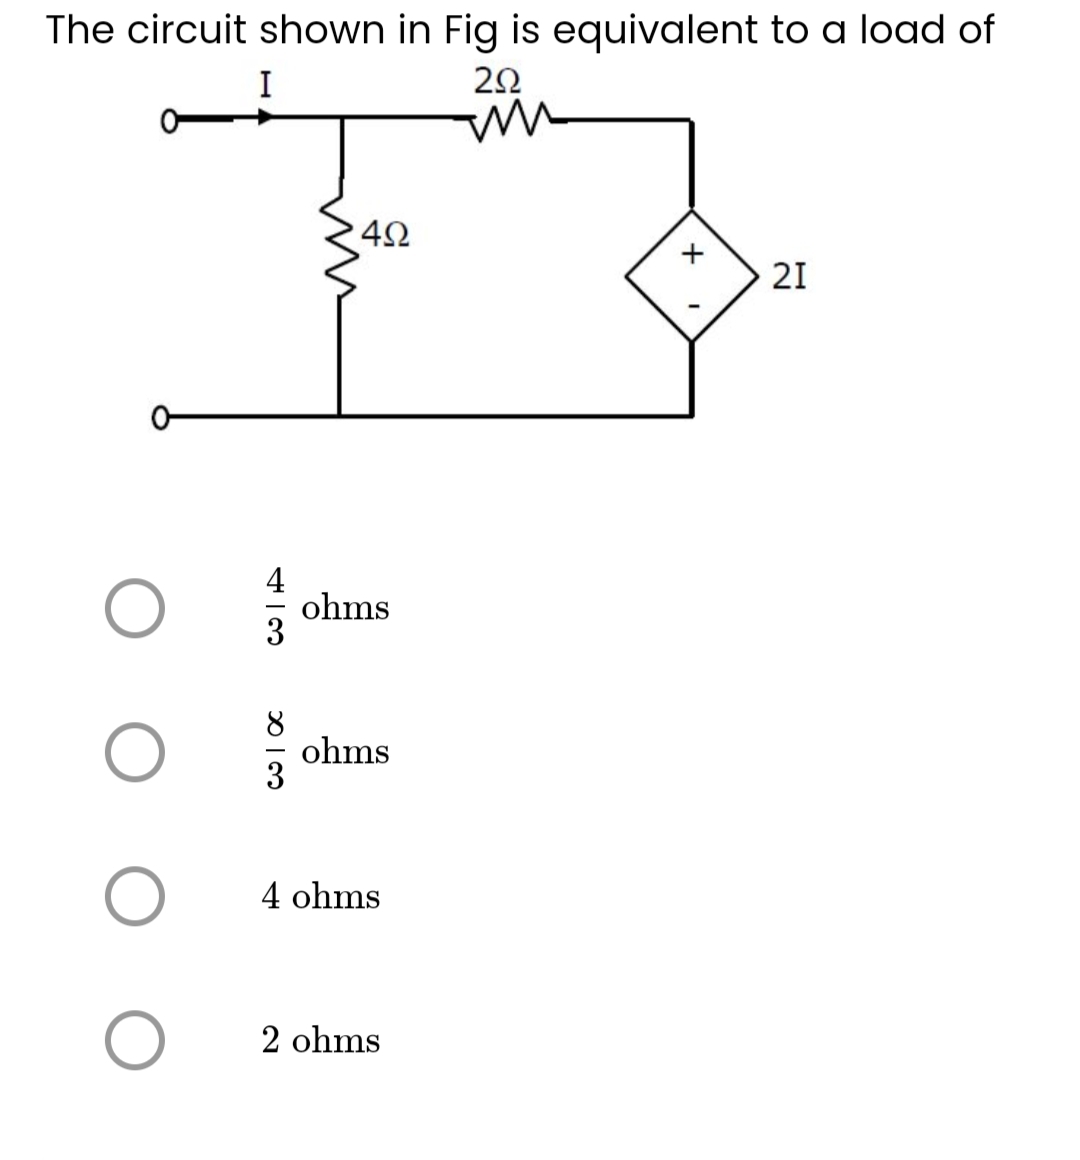 The circuit shown in Fig is equivalent to a load of
I
292
O
O
O
X3
452
ohms
ohms
4 ohms
2 ohms
+
21